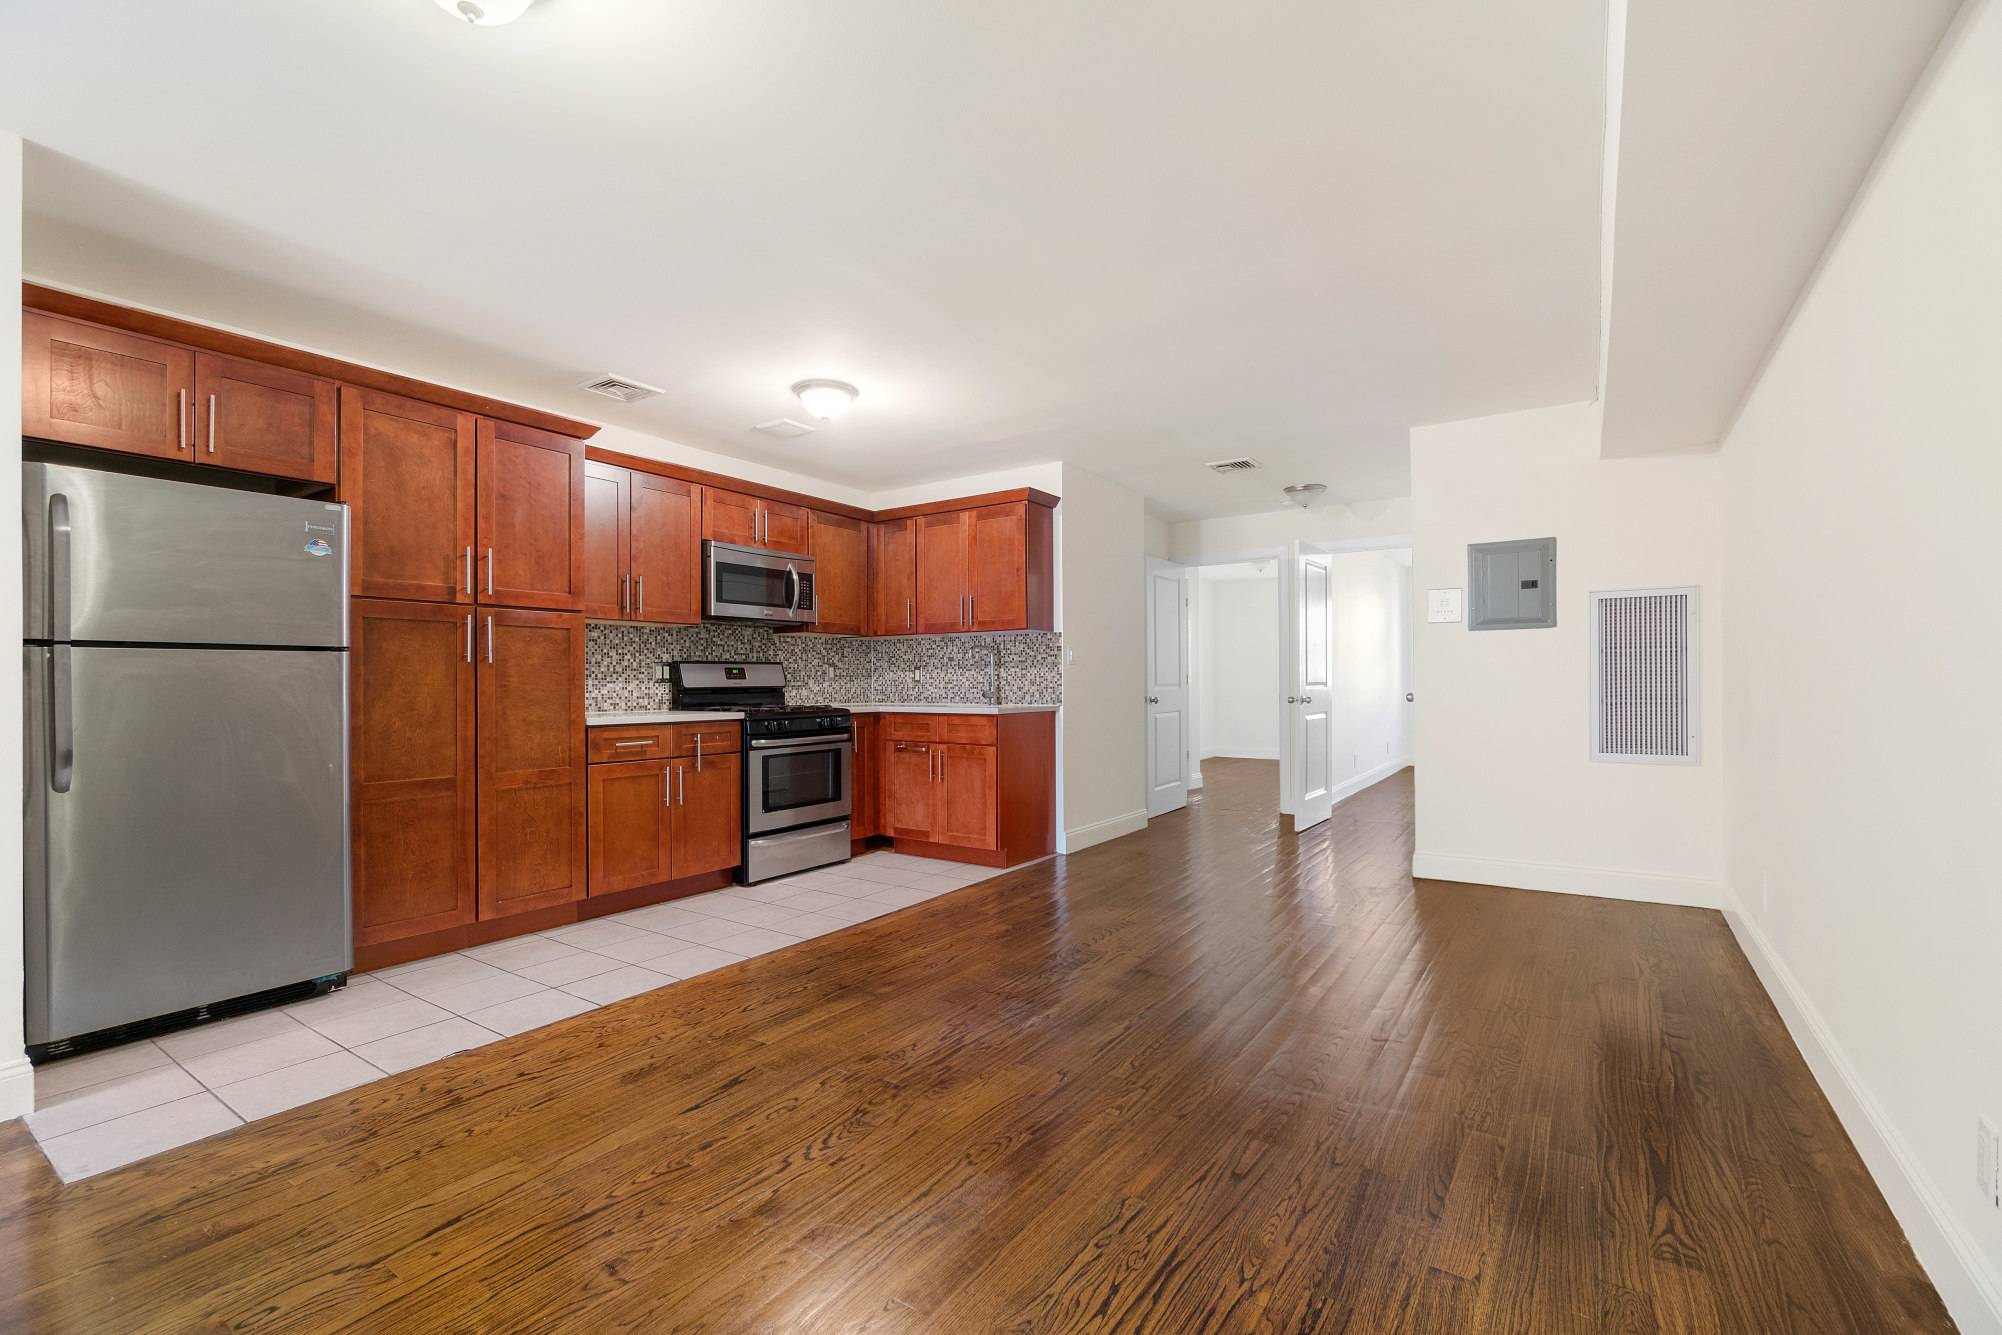 Rent Reduced for This charming 3BR 1 BA space with handsome wood flooring and open kitchen is move in ready.